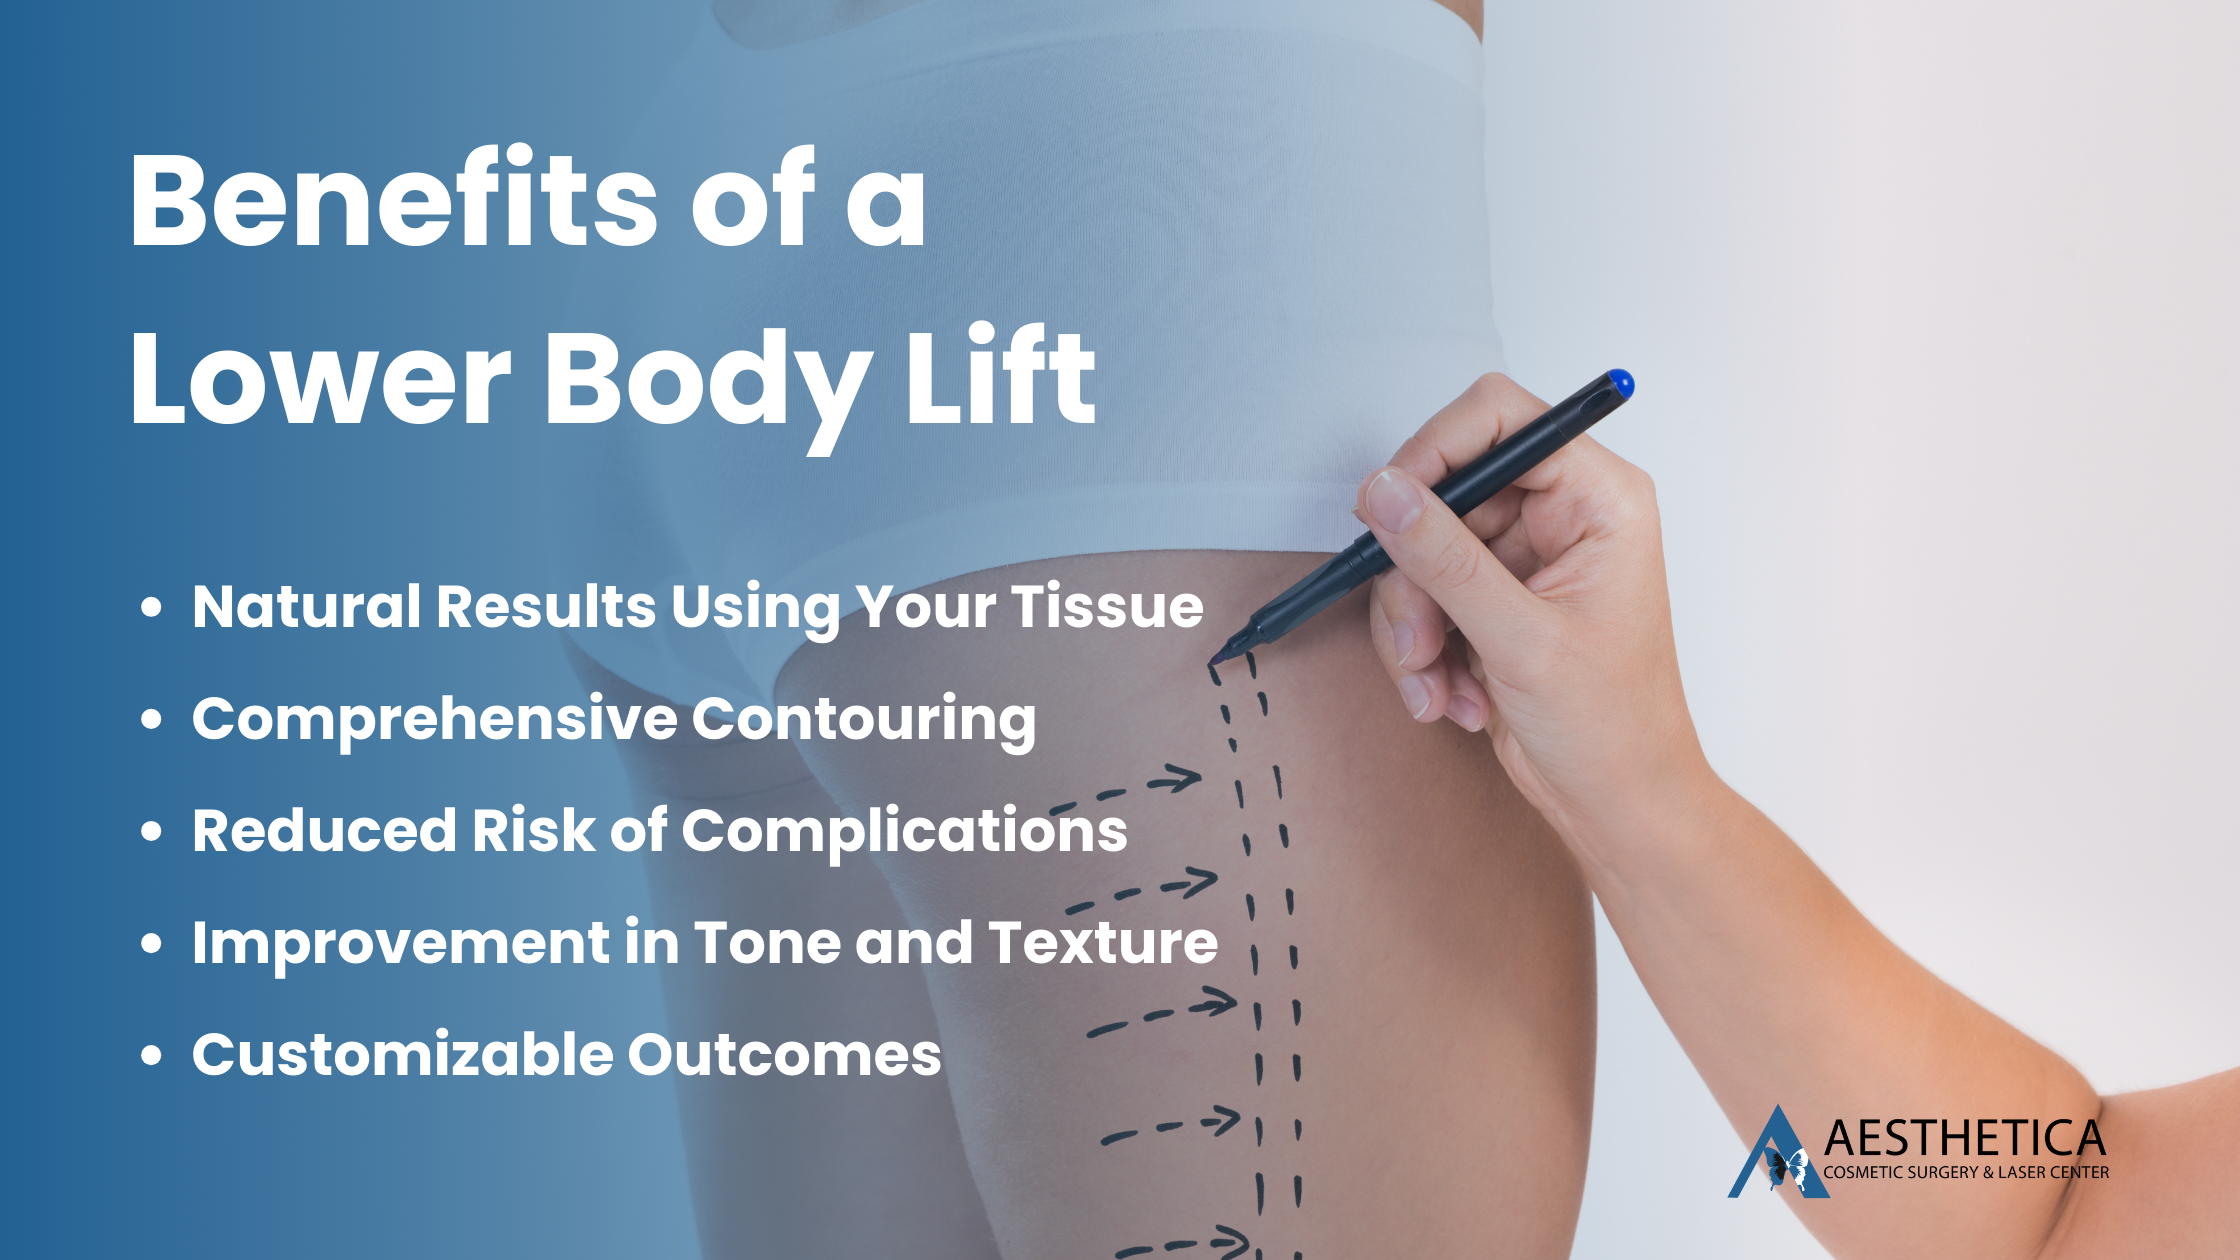 Benefits of a lower body lift